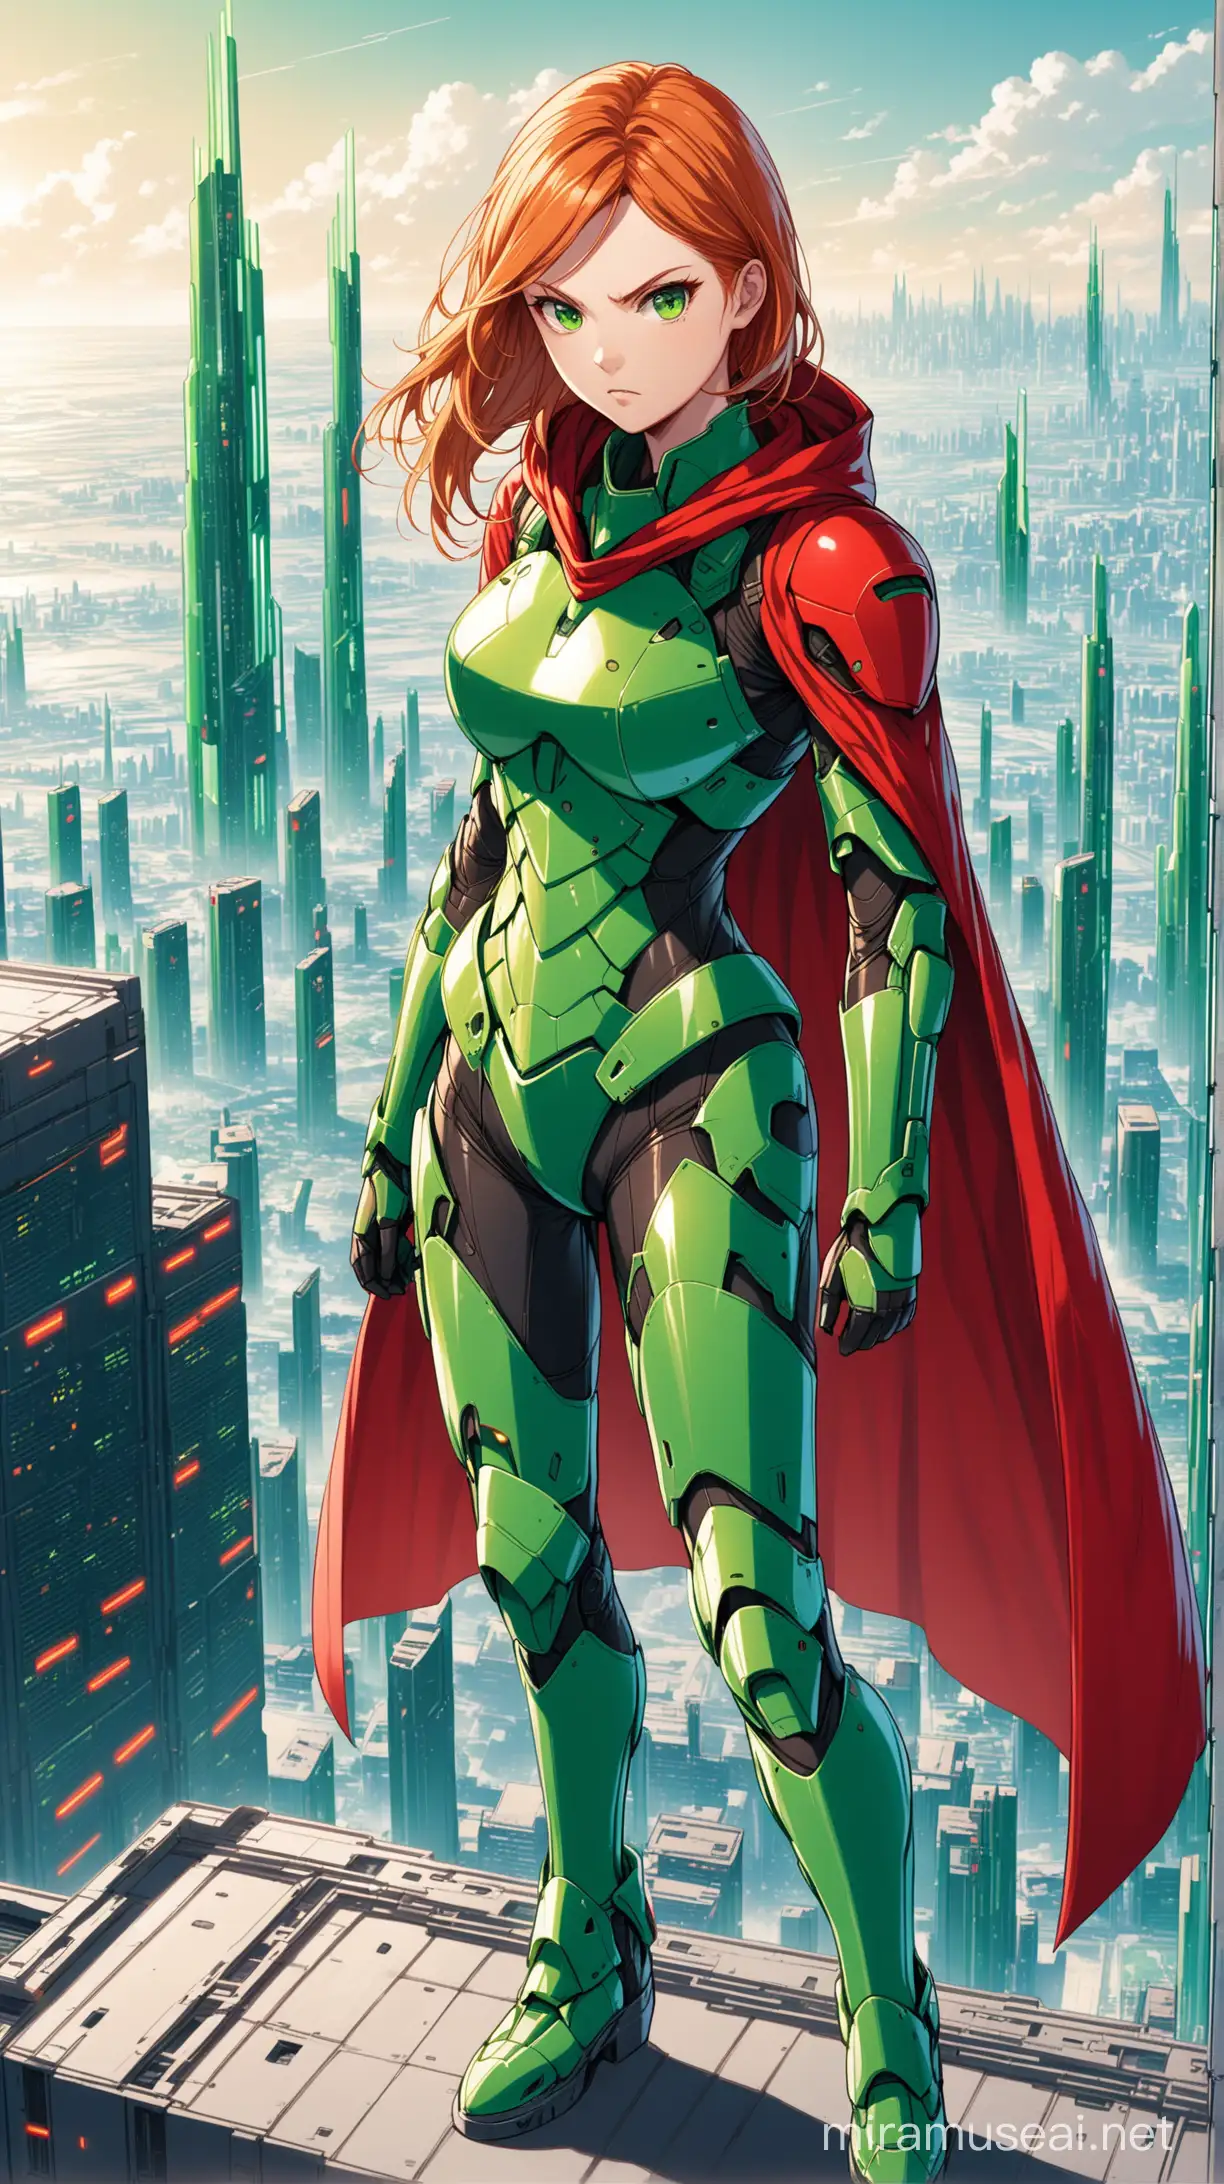 Futuristic Heroine GreenEyed Warrior Stands Tall in Cityscape